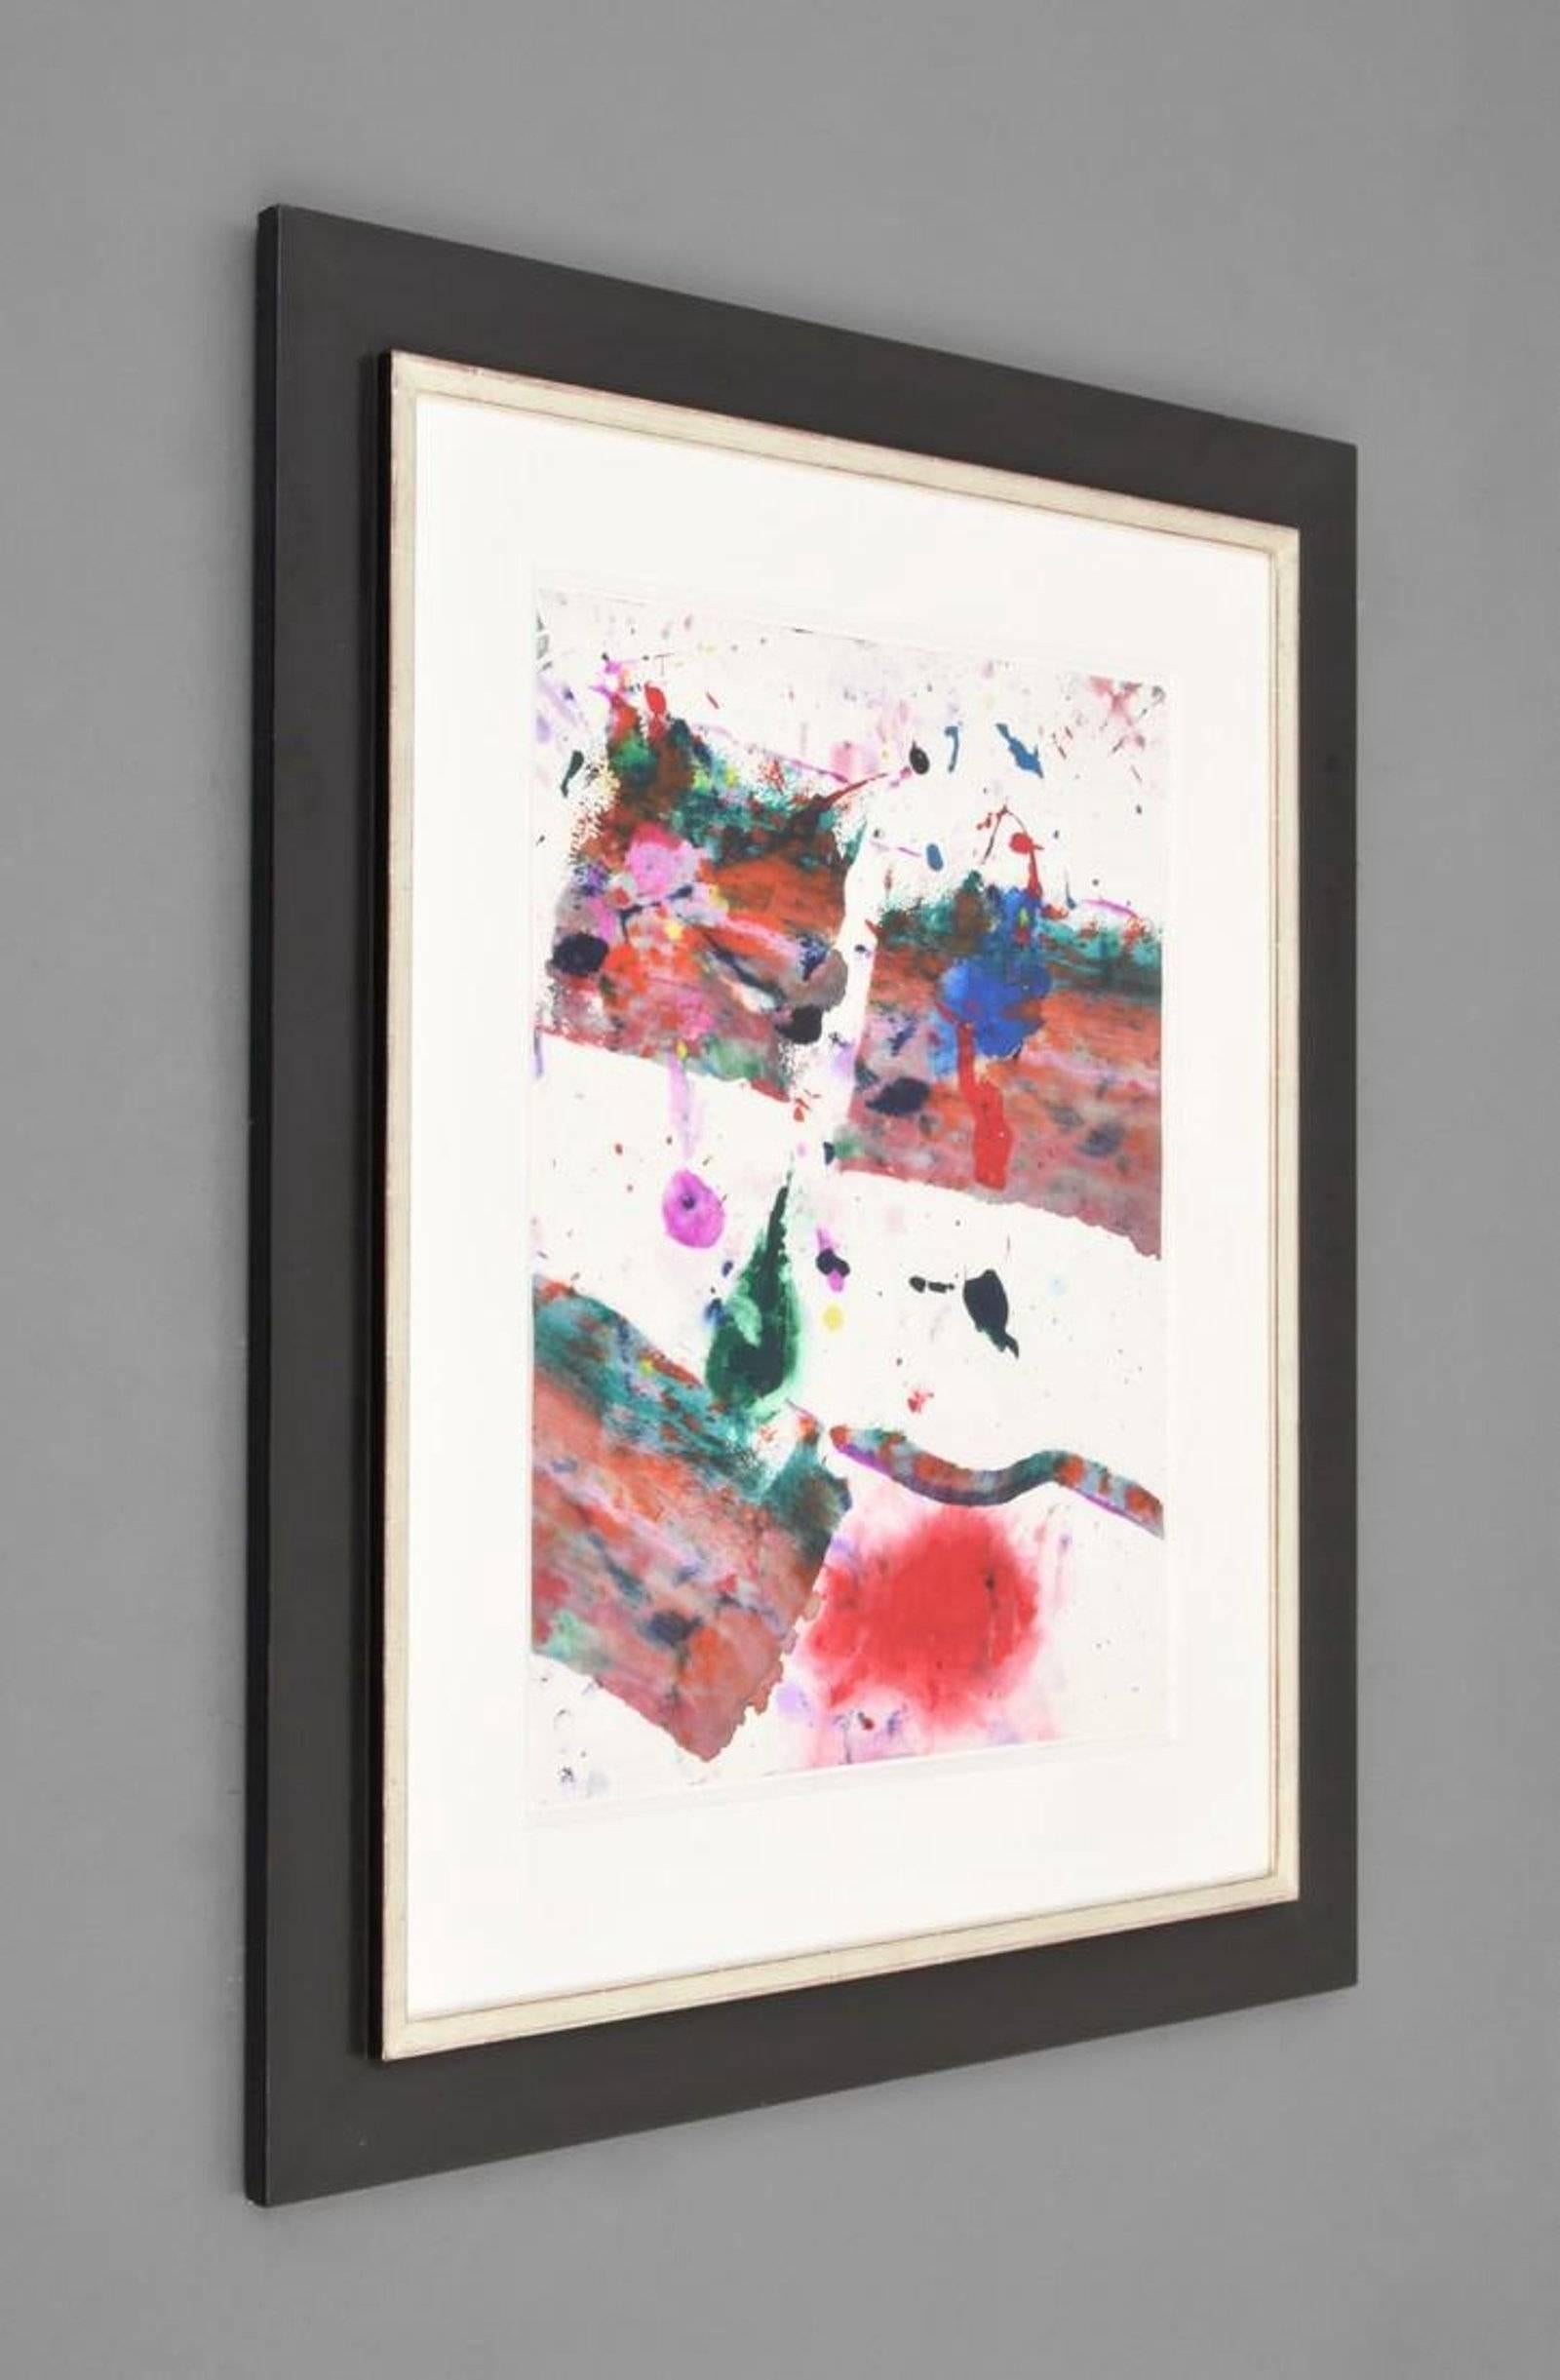 Painting by Sam Francis (1923-1994). Work is no. SF80-1191. Work is accompanied by a copy of the receipt issued 10.8.2005 by Cornette de Saint Cyr, Paris, France.  Provenance: Estate of the artist, California  Gallery Delaive, Amsterdam, Netherlands